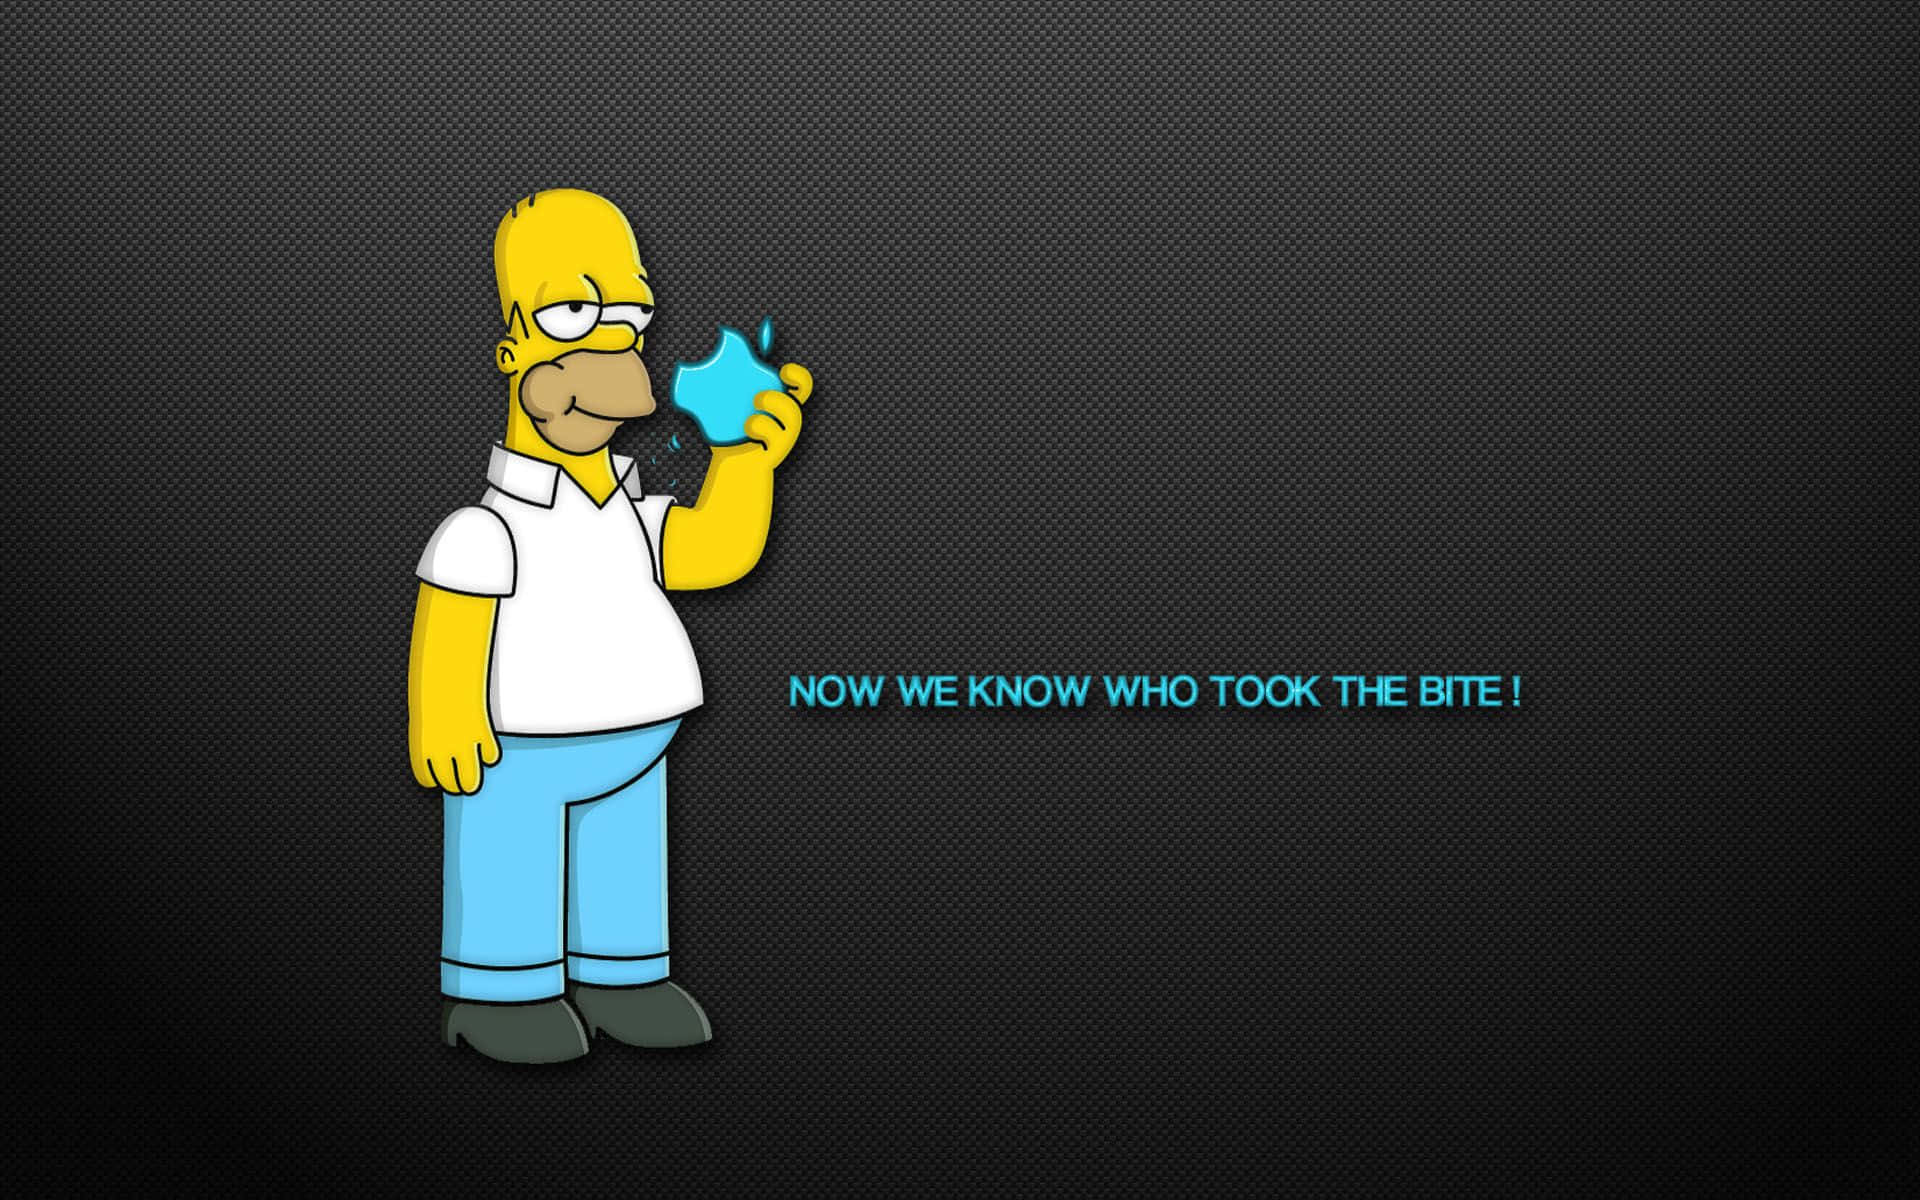 "You have to stay in school to get the full Simpsons experience!" Wallpaper